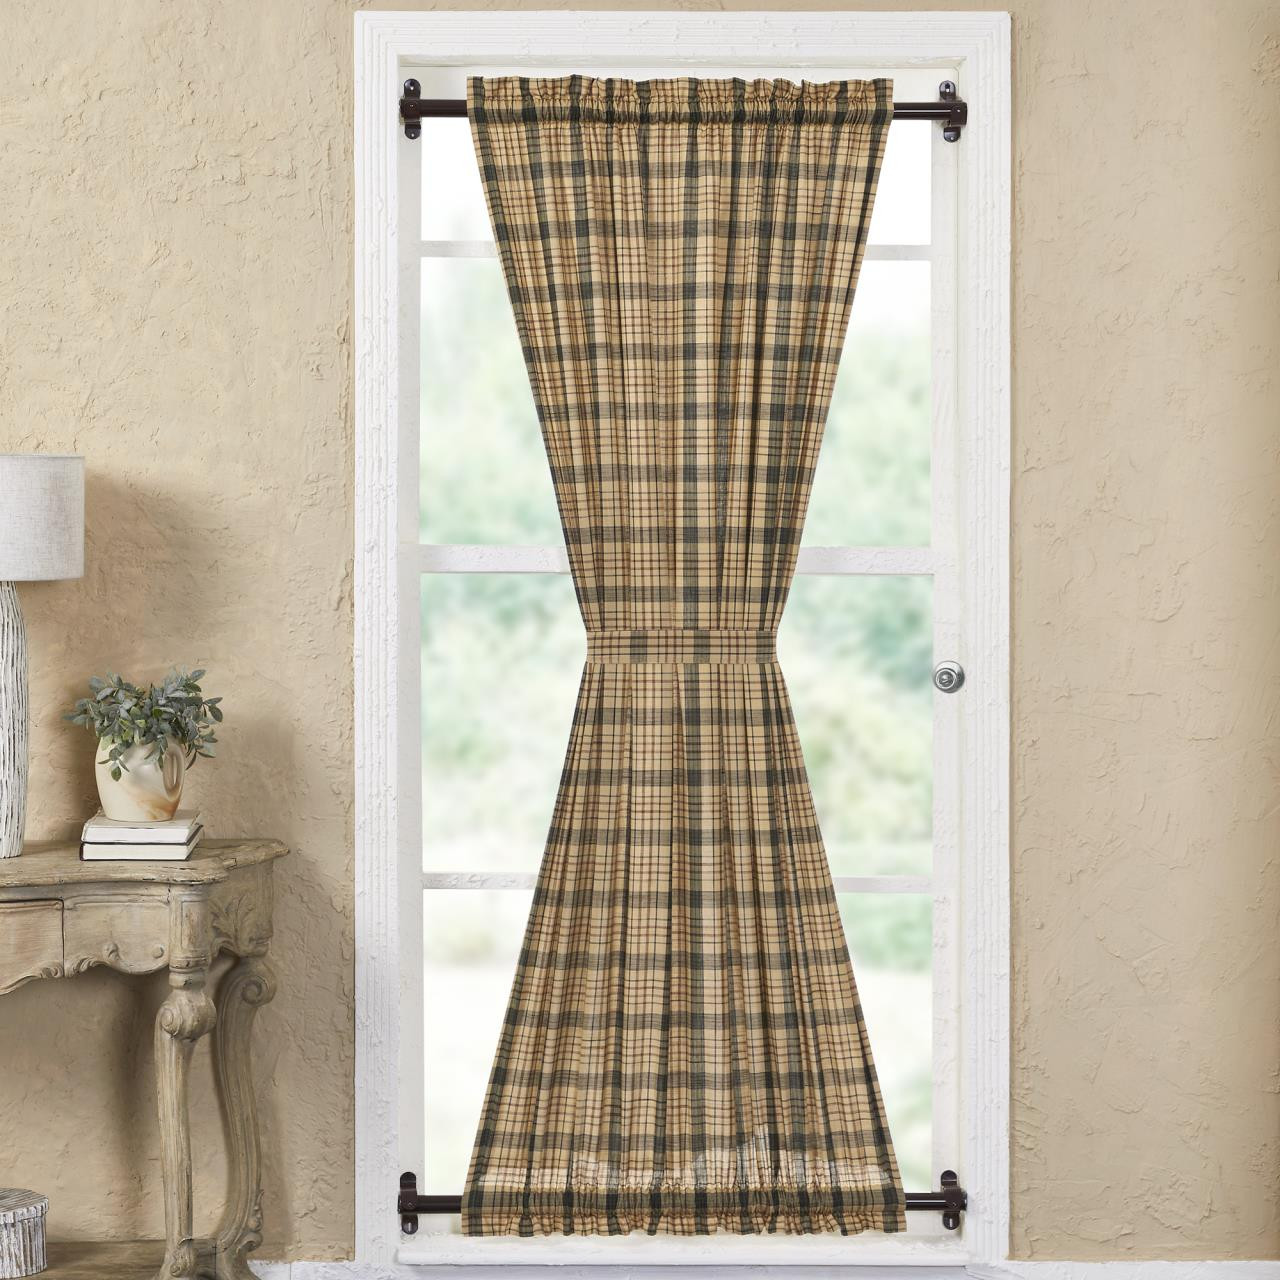 Cider Mill Classic Primitive Country Curtain Collection -